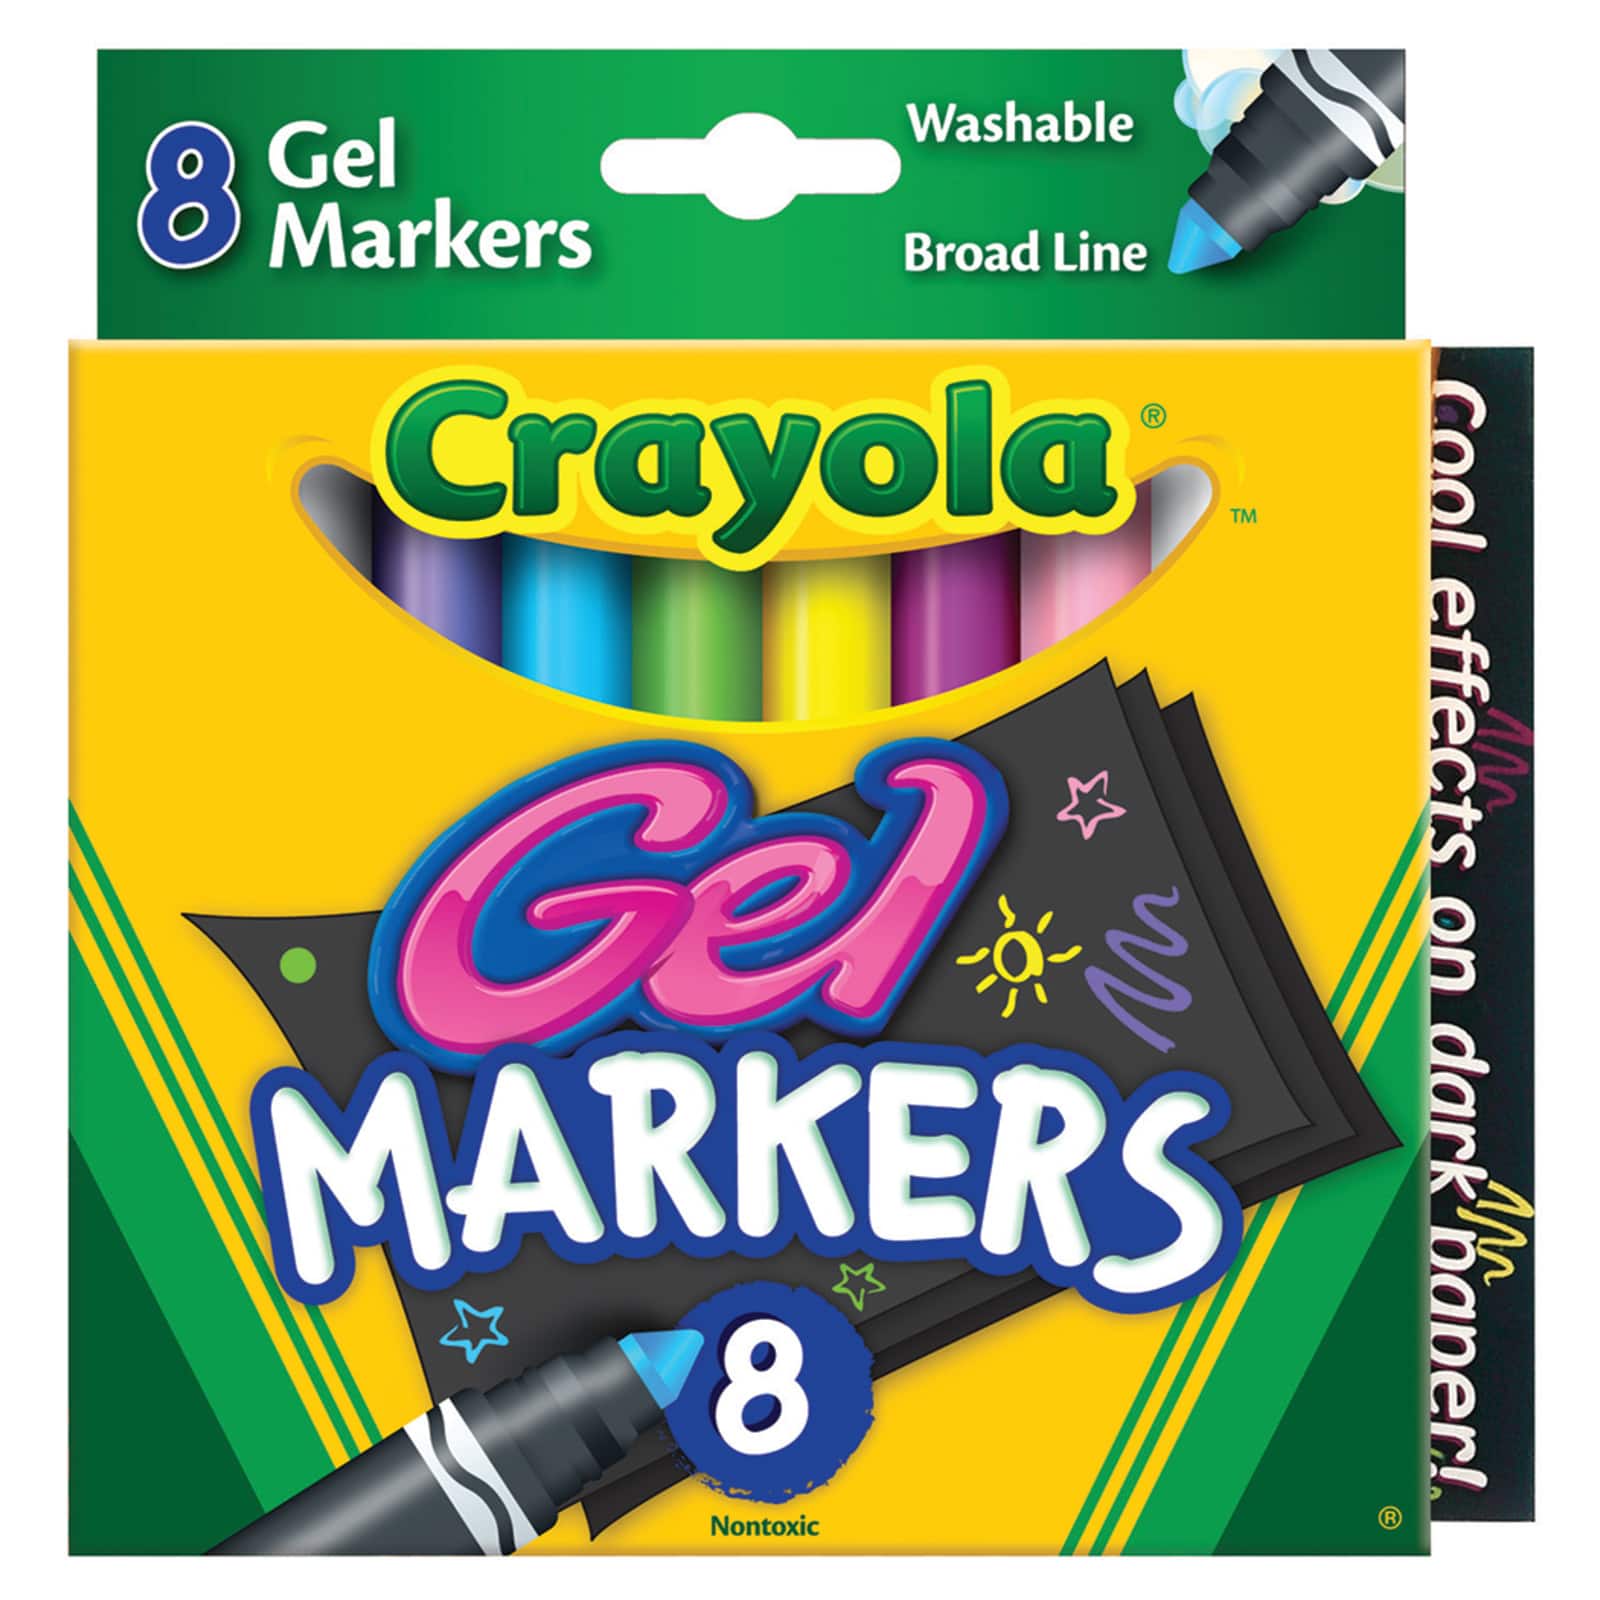 Crayola® Take Note™ Color Changing Pens, 4ct., Michaels